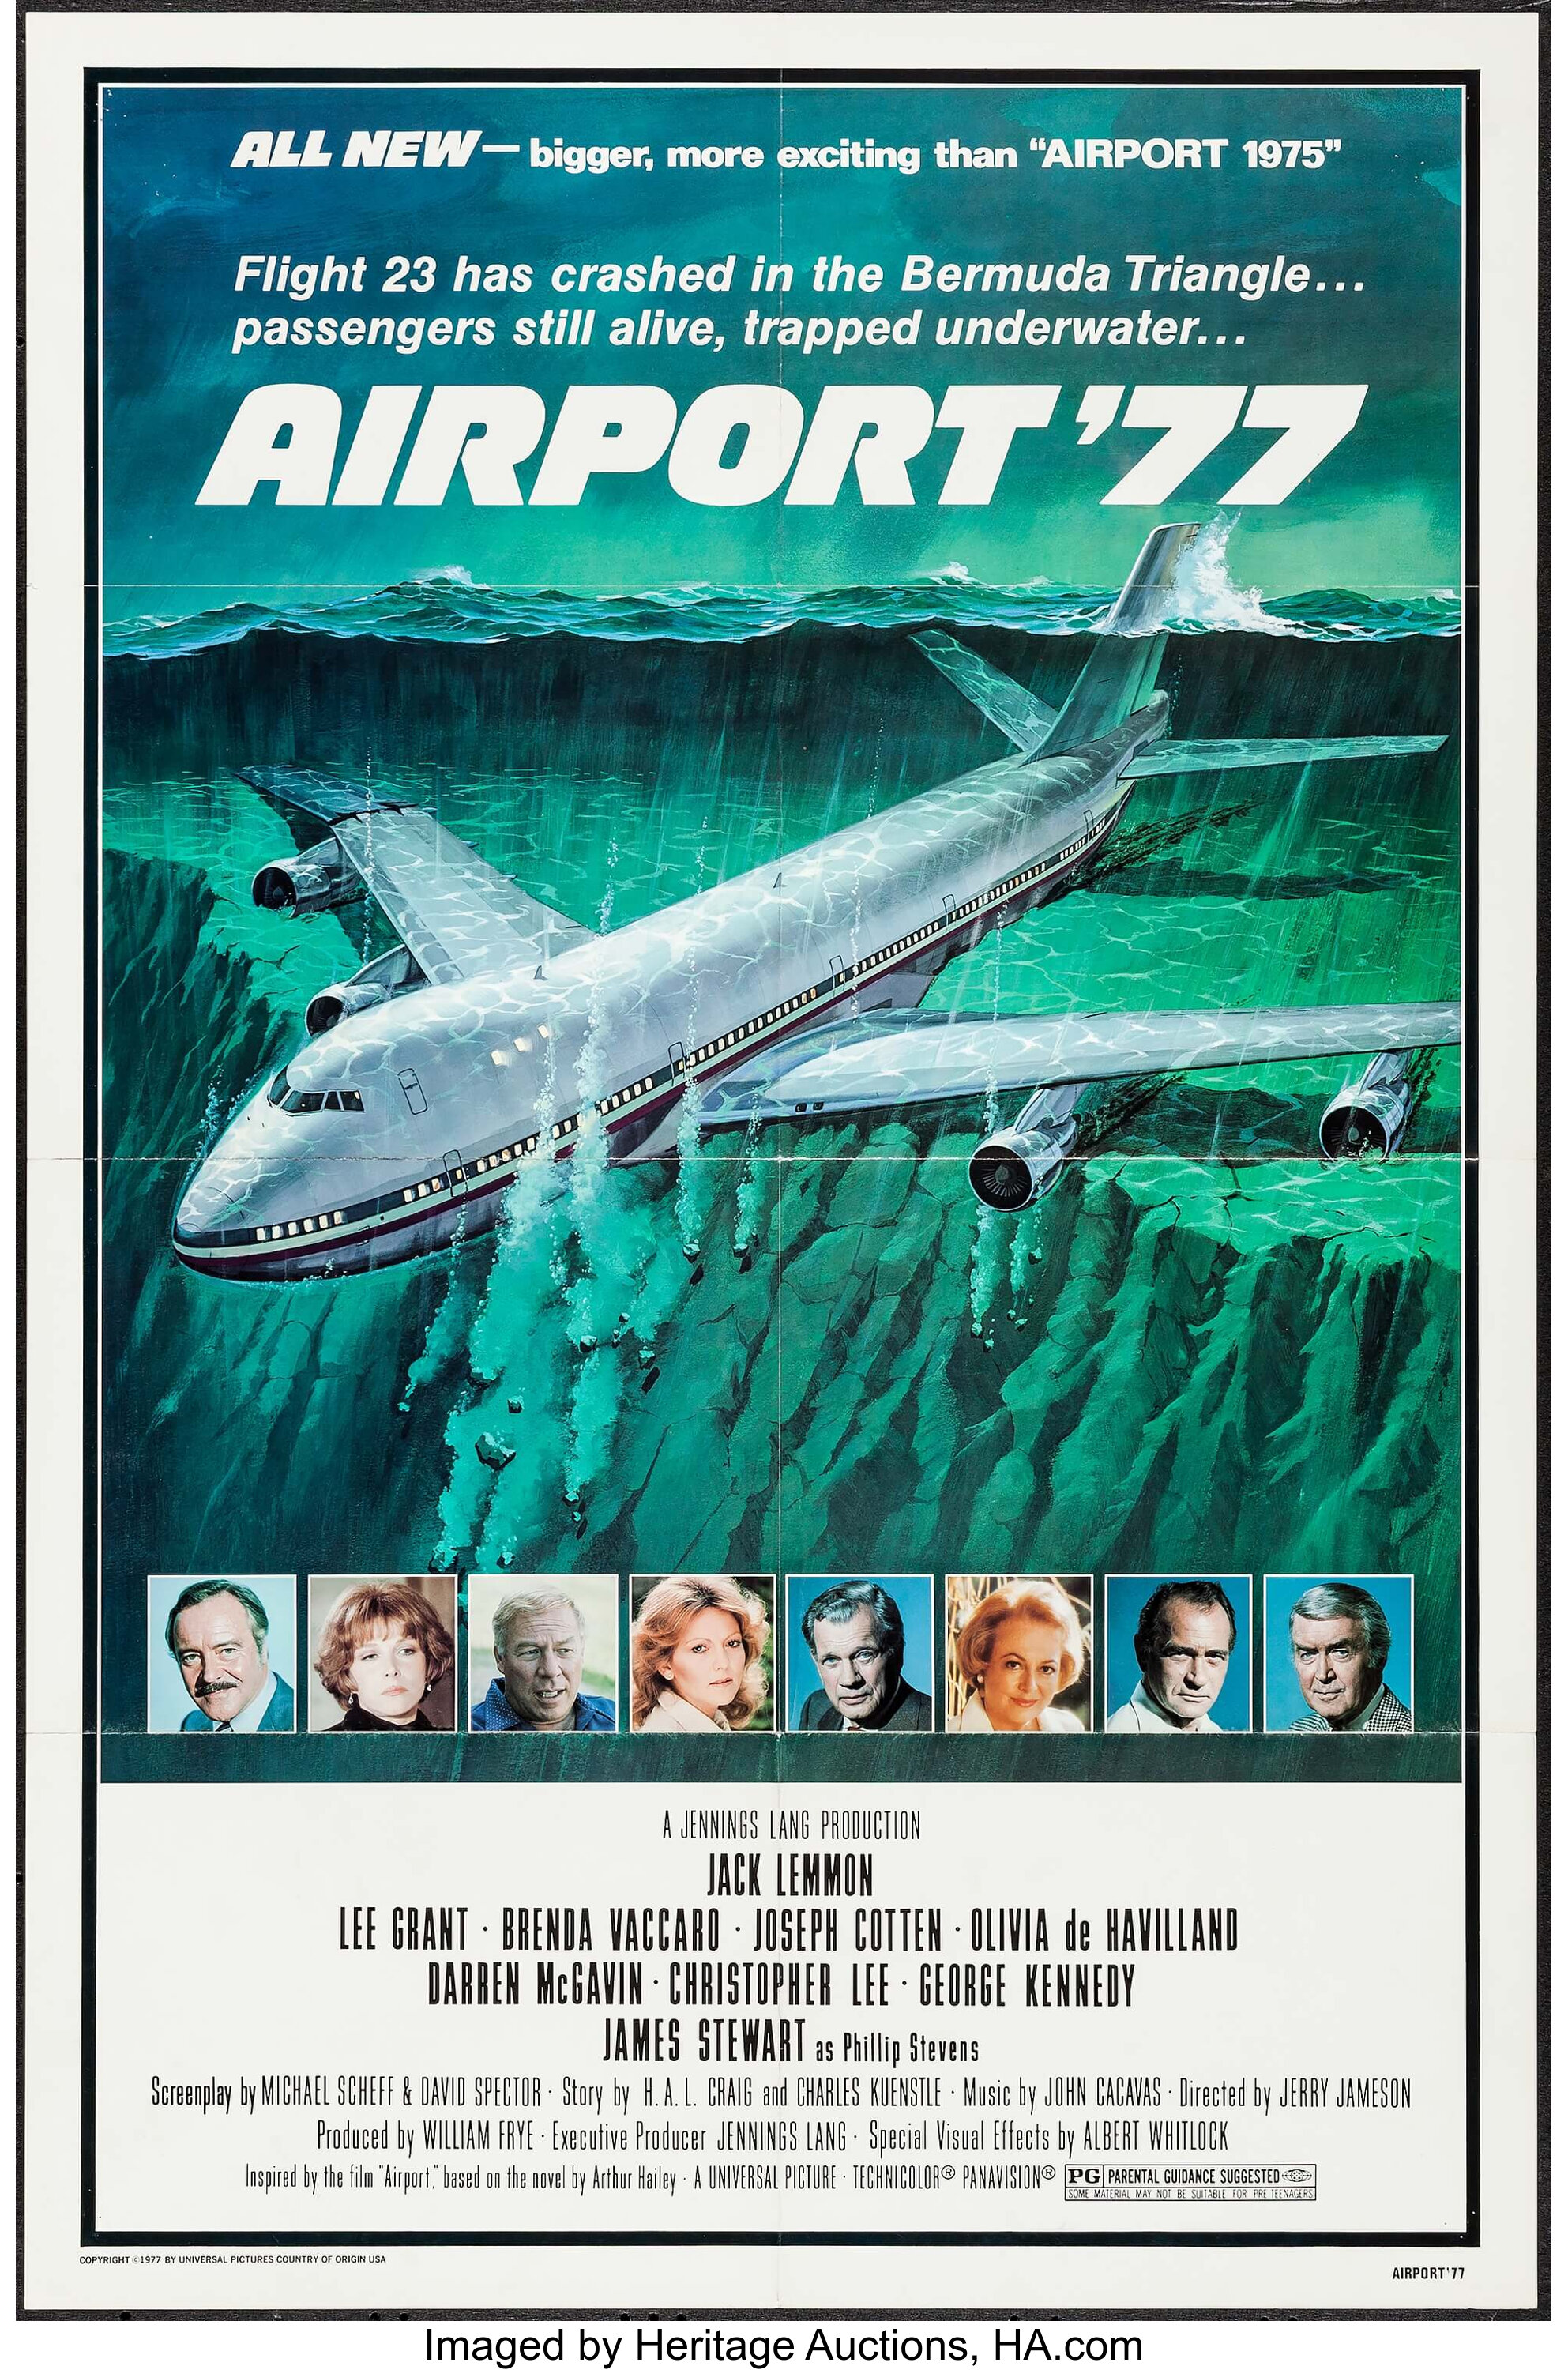 Image result for airport 77 poster